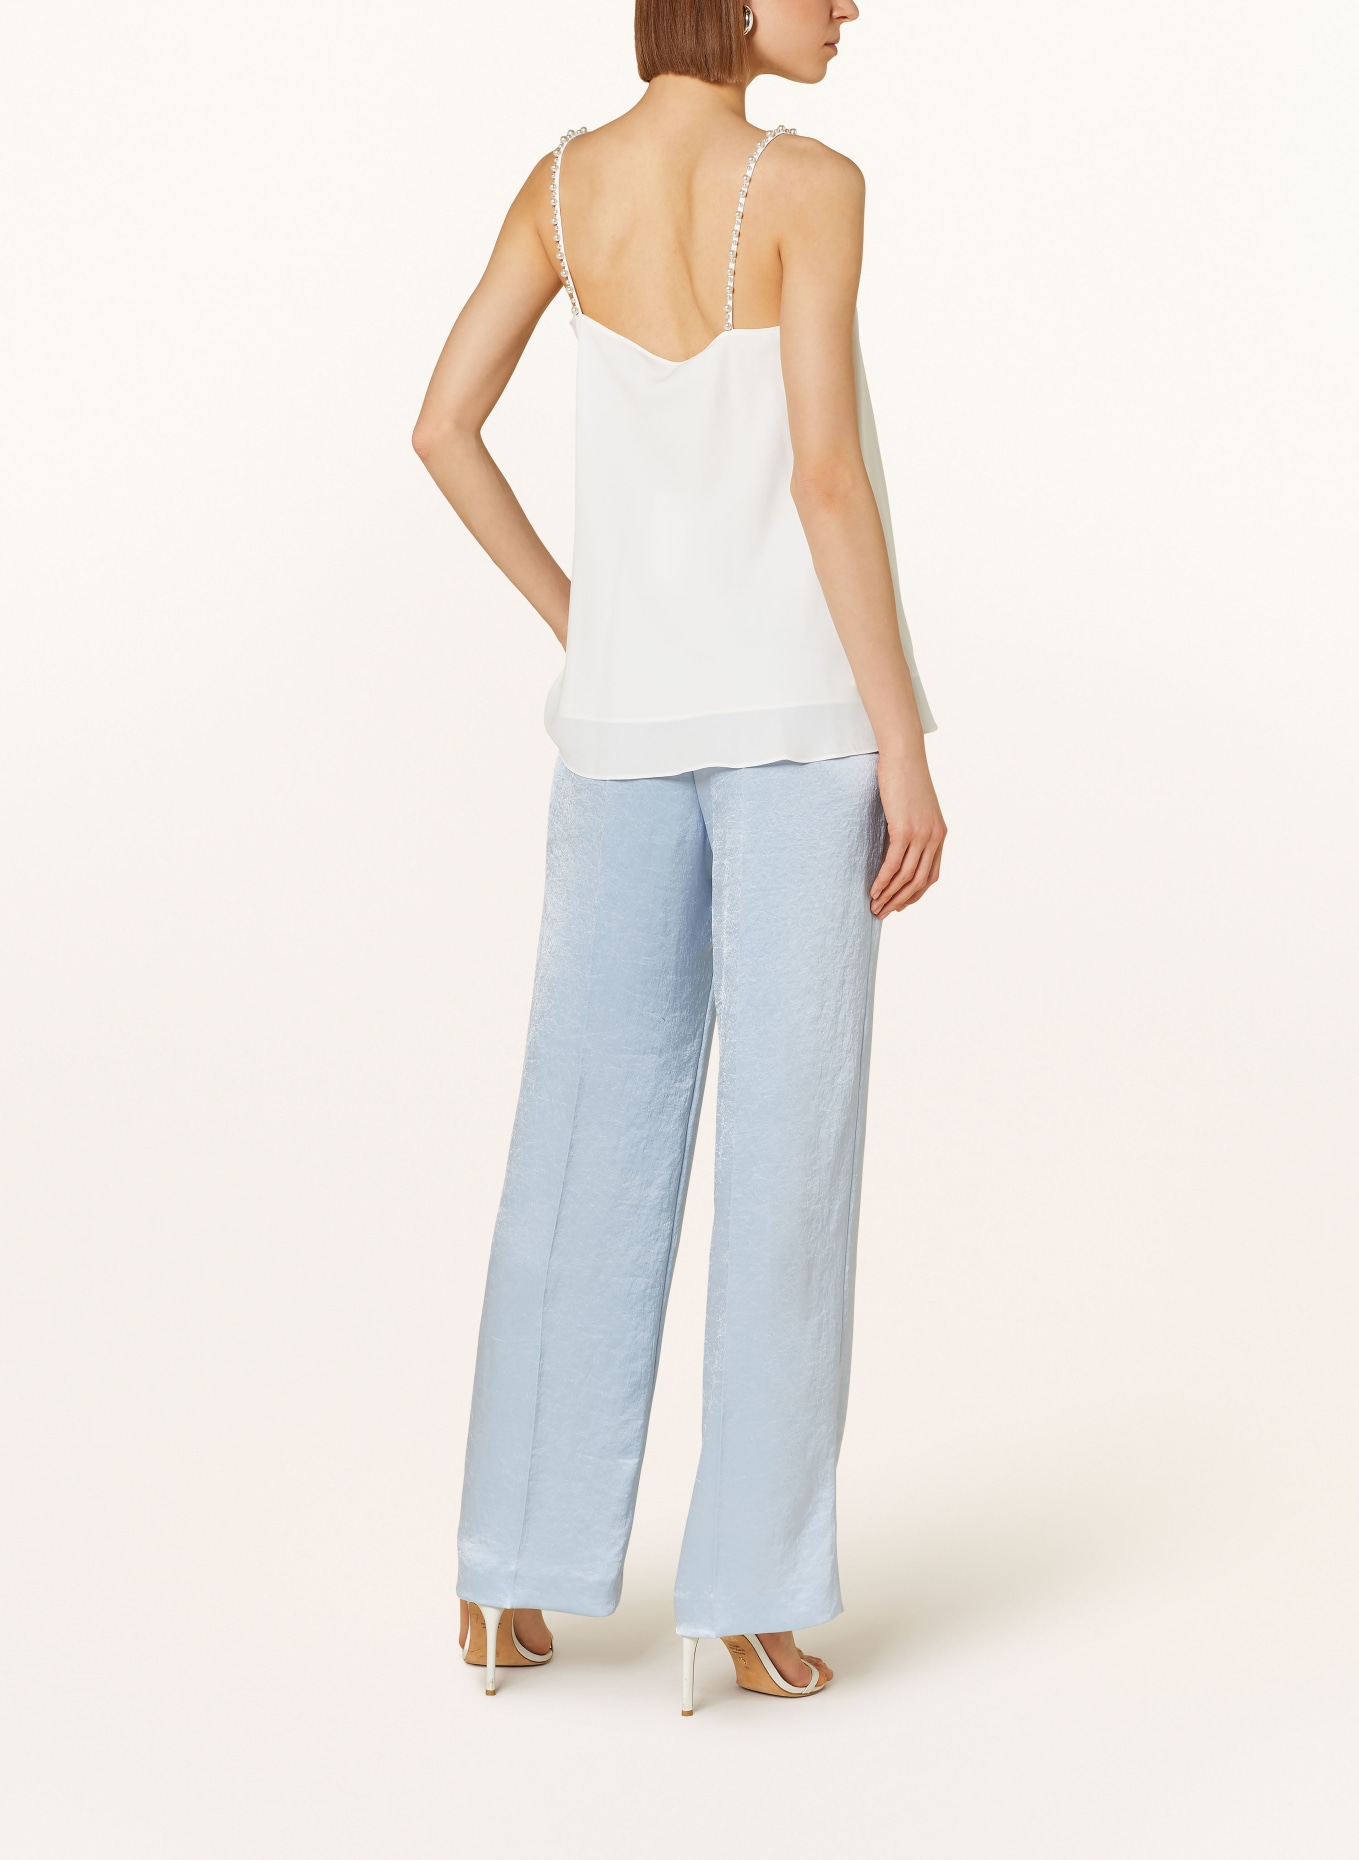 MARC CAIN Blouse top with decorative beads, Color: WHITE (Image 3)